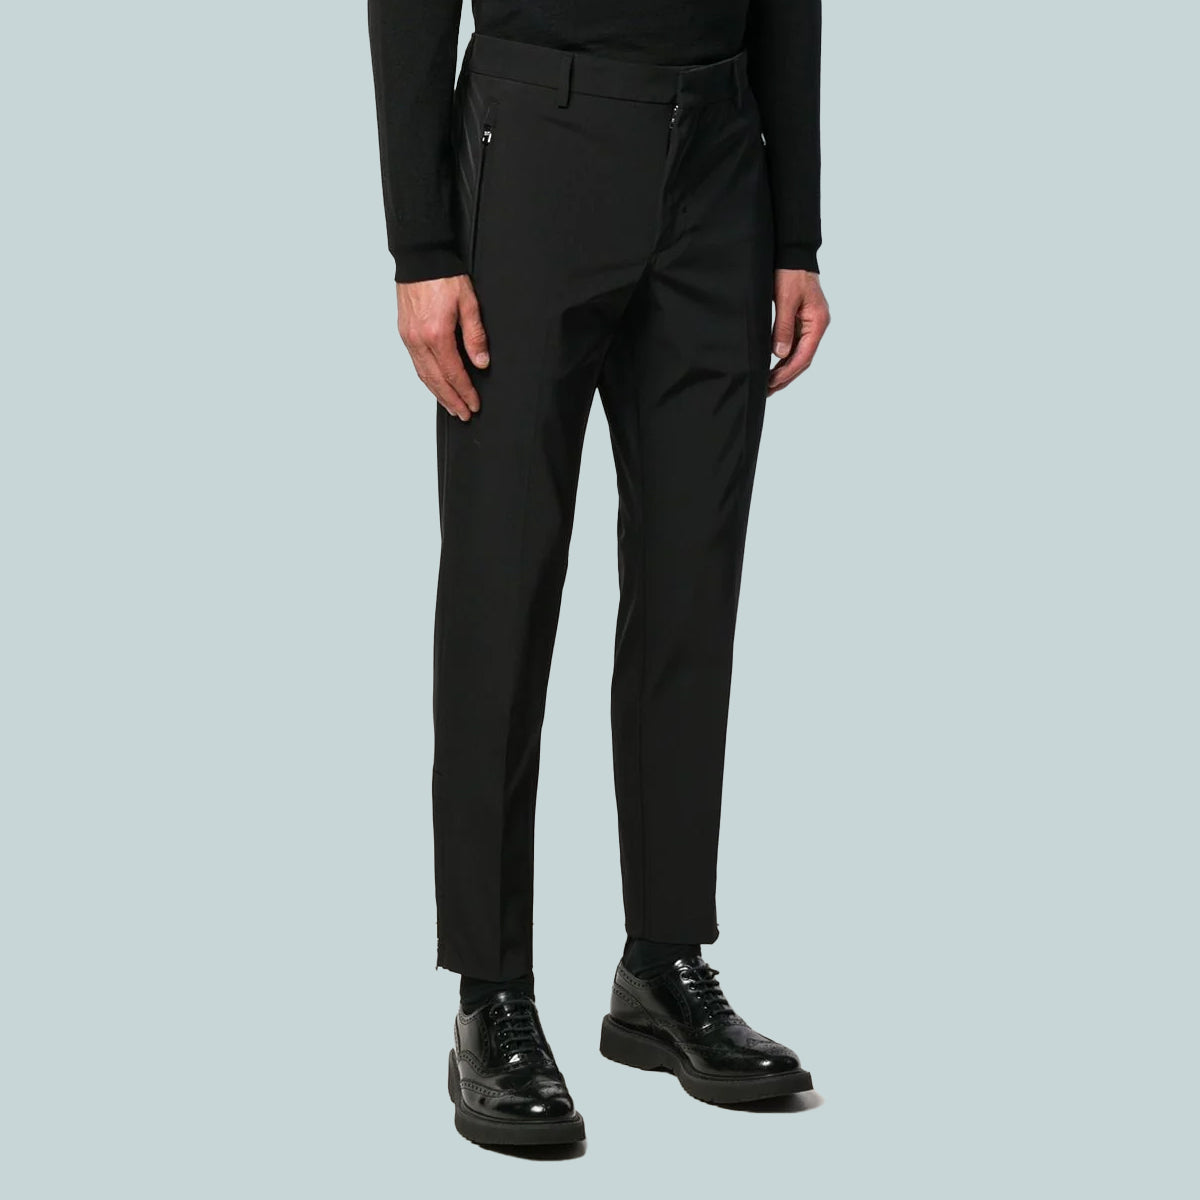 Classic tailored trousers